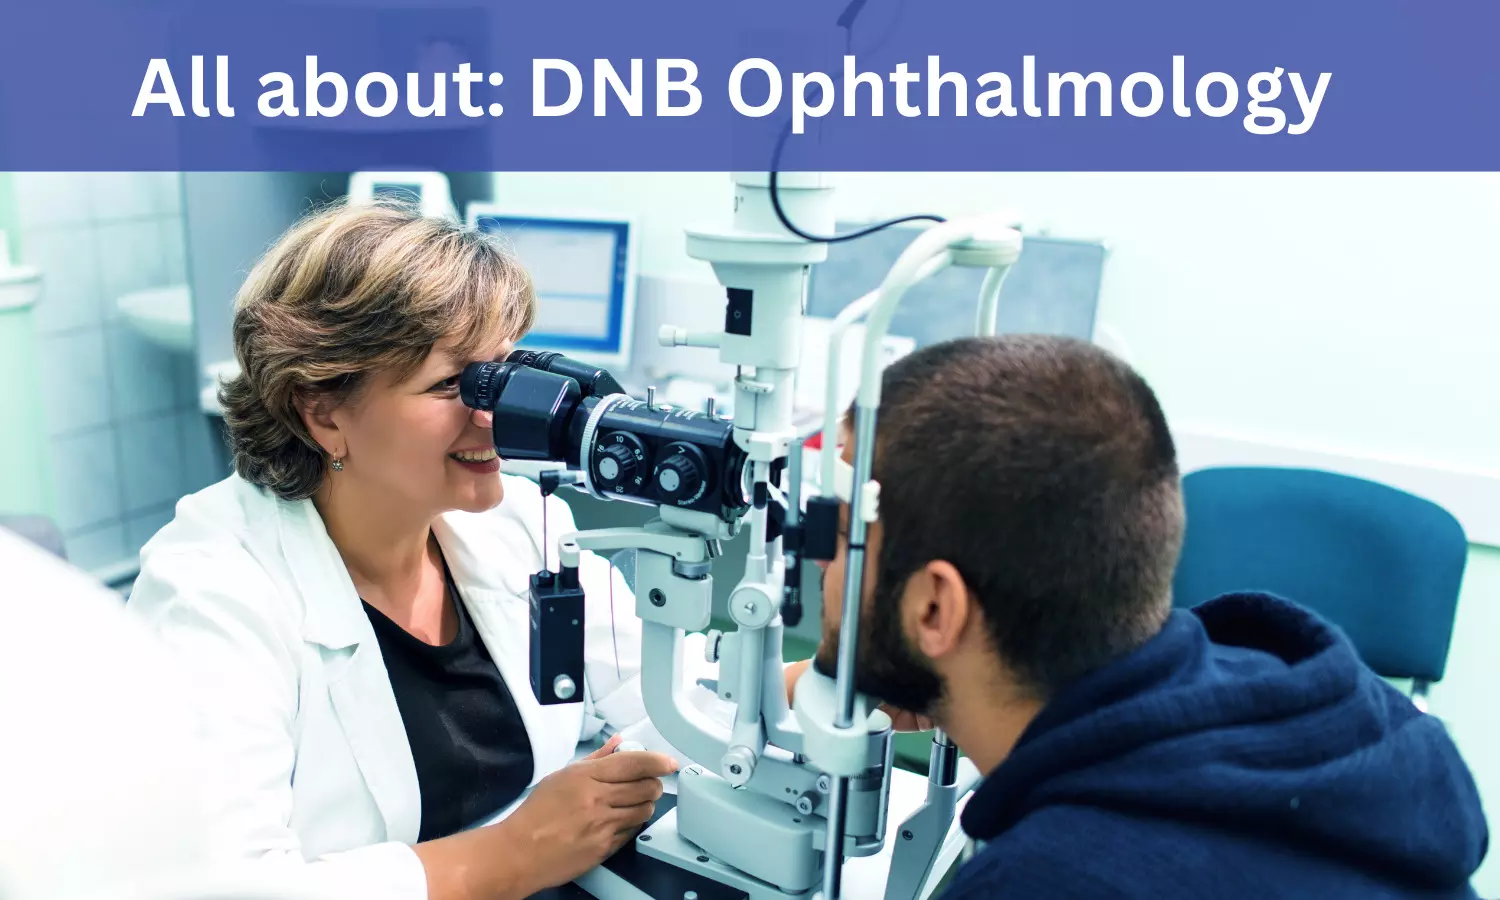 DNB Ophthalmology: Admissions, Medical Colleges, fees, eligibility criteria details here